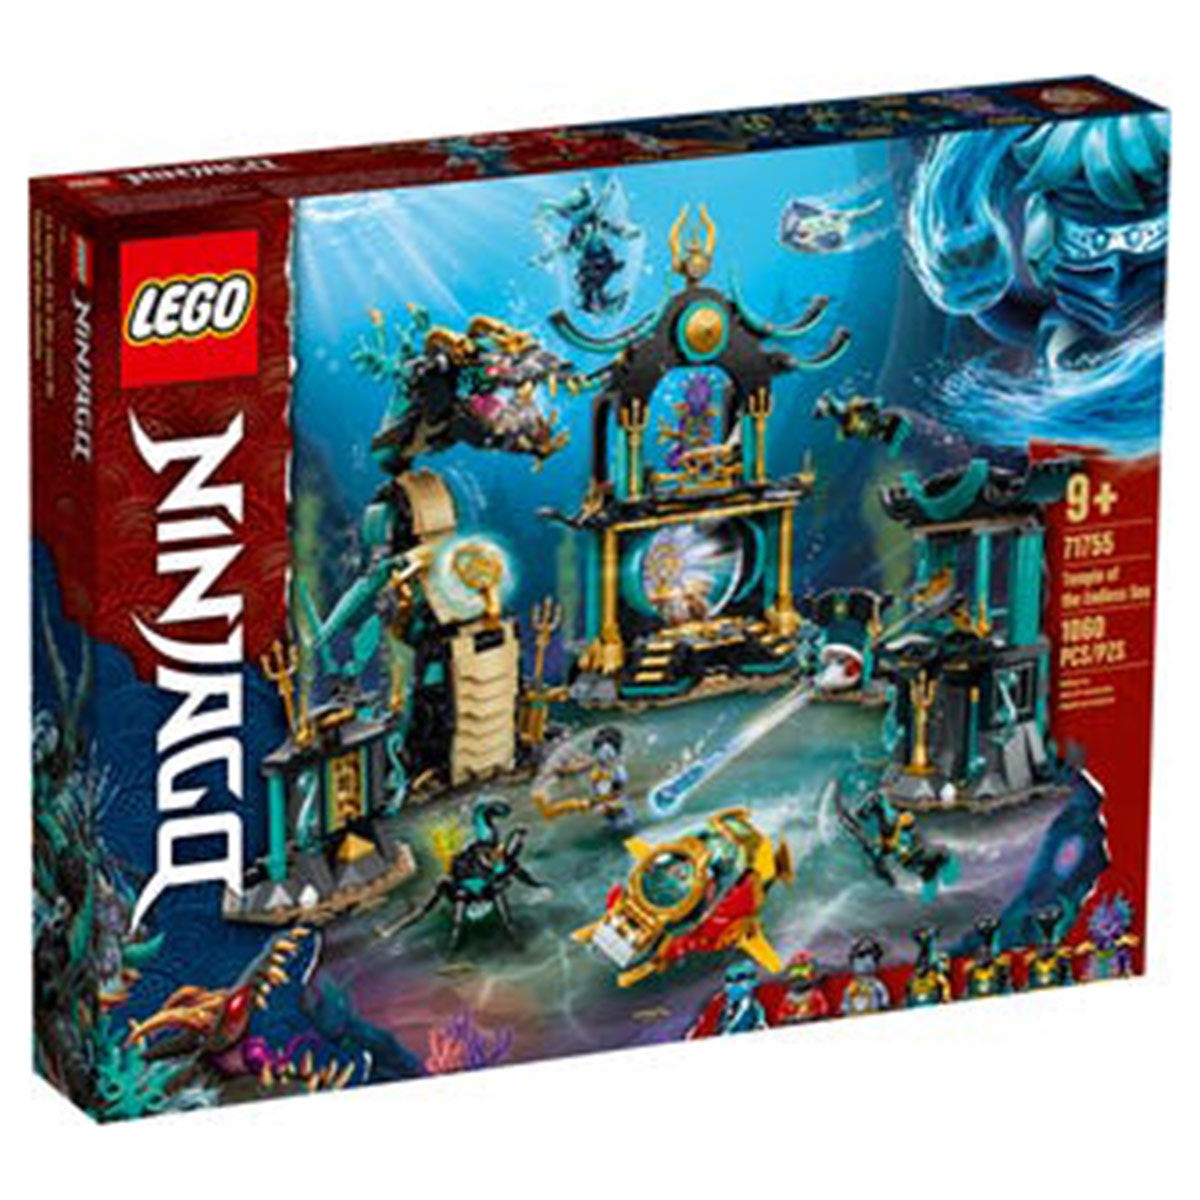 LEGO JOUET K.I.D. INC Toys & Games LEGO Ninjago Temple of the Endless Sea, 71755, Ages 9+, 1060 Pieces 673419339209